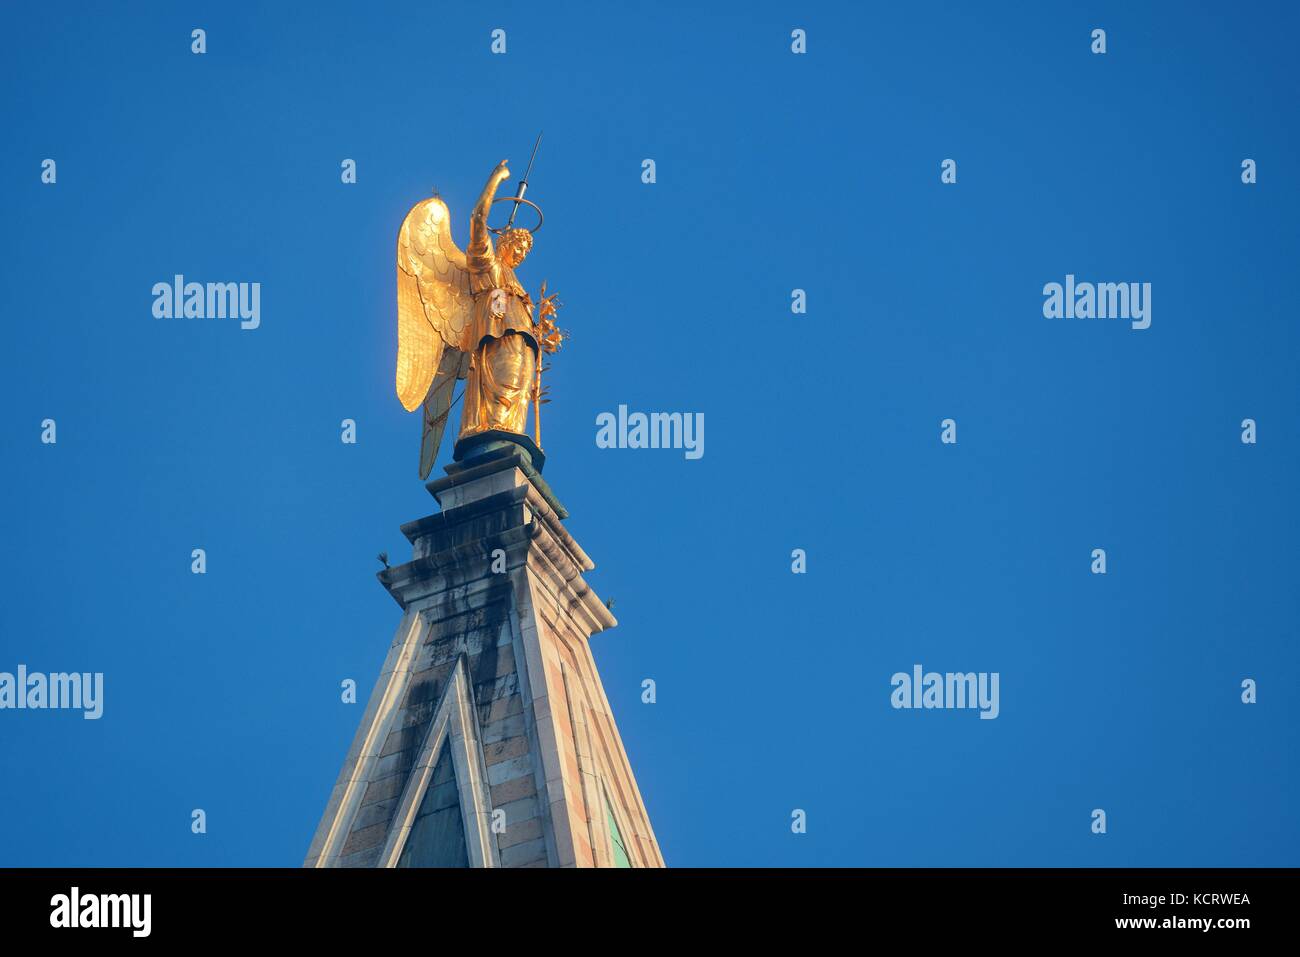 Golden statue of angel on top of clock tower in St Mark's Square, Venice, Italy. Stock Photo